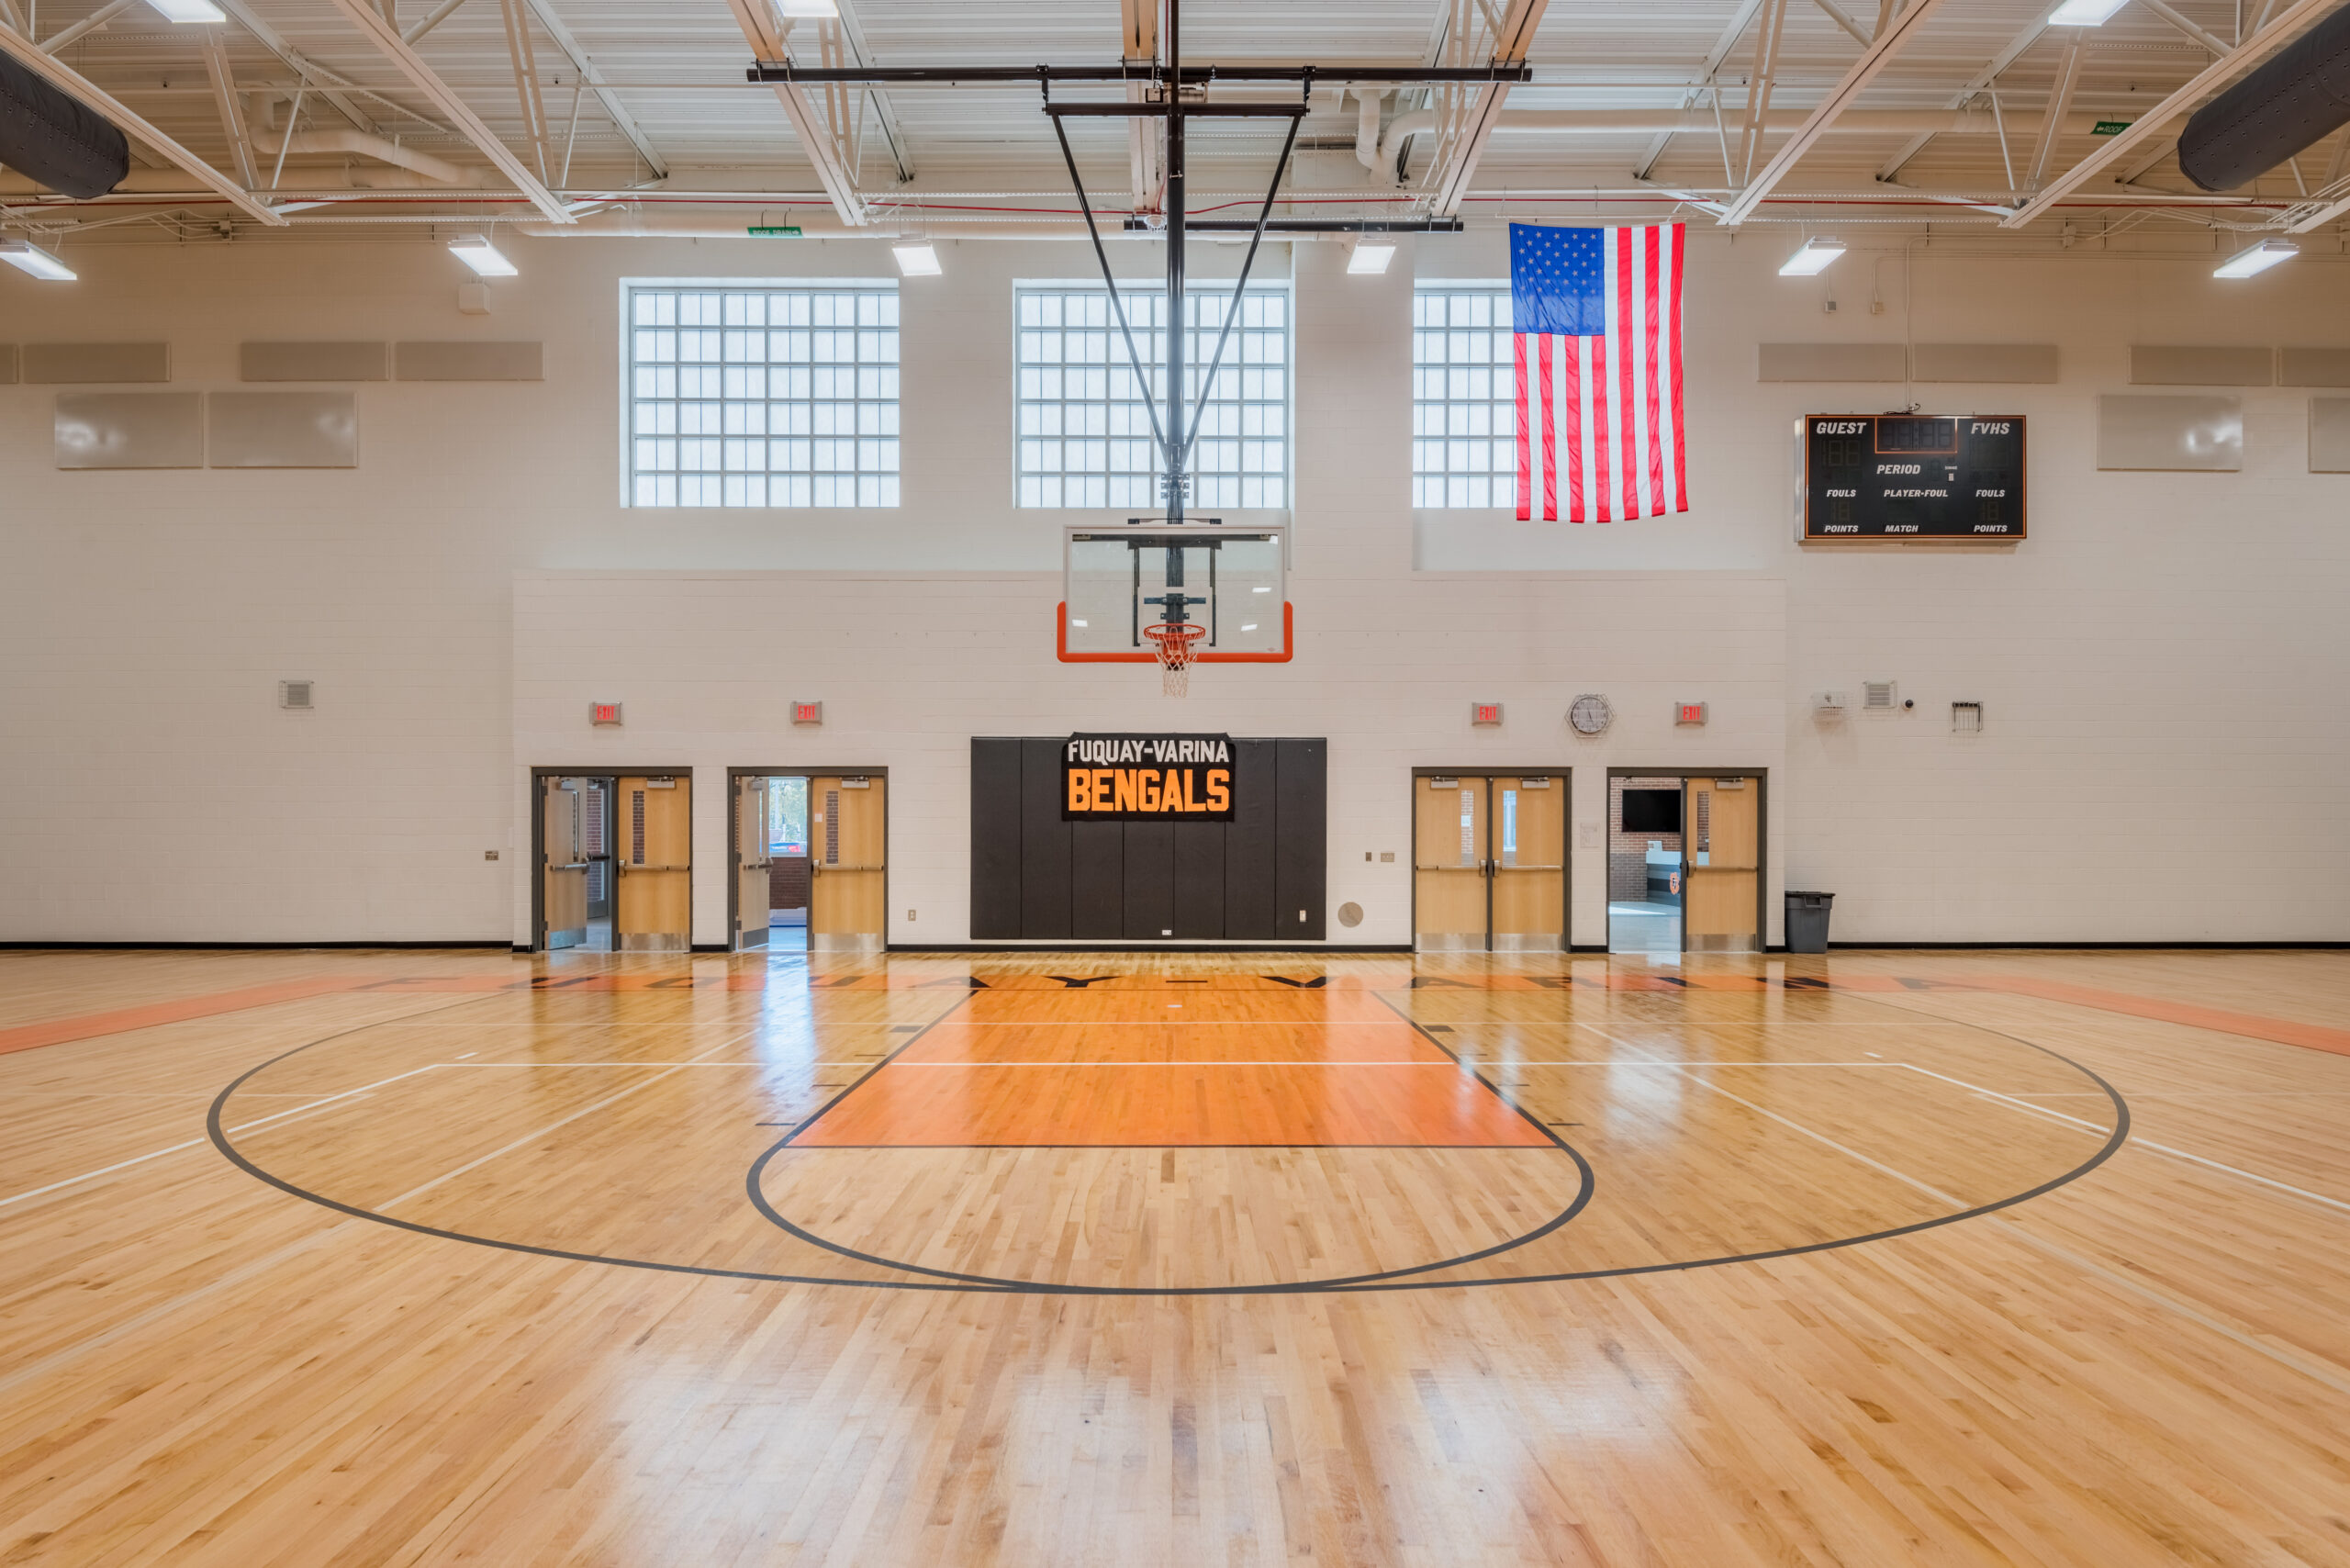 Fuquay-Varina High School Gymnasium with Basketball Court, Safety Wall Pads, and Orange Floor Paint